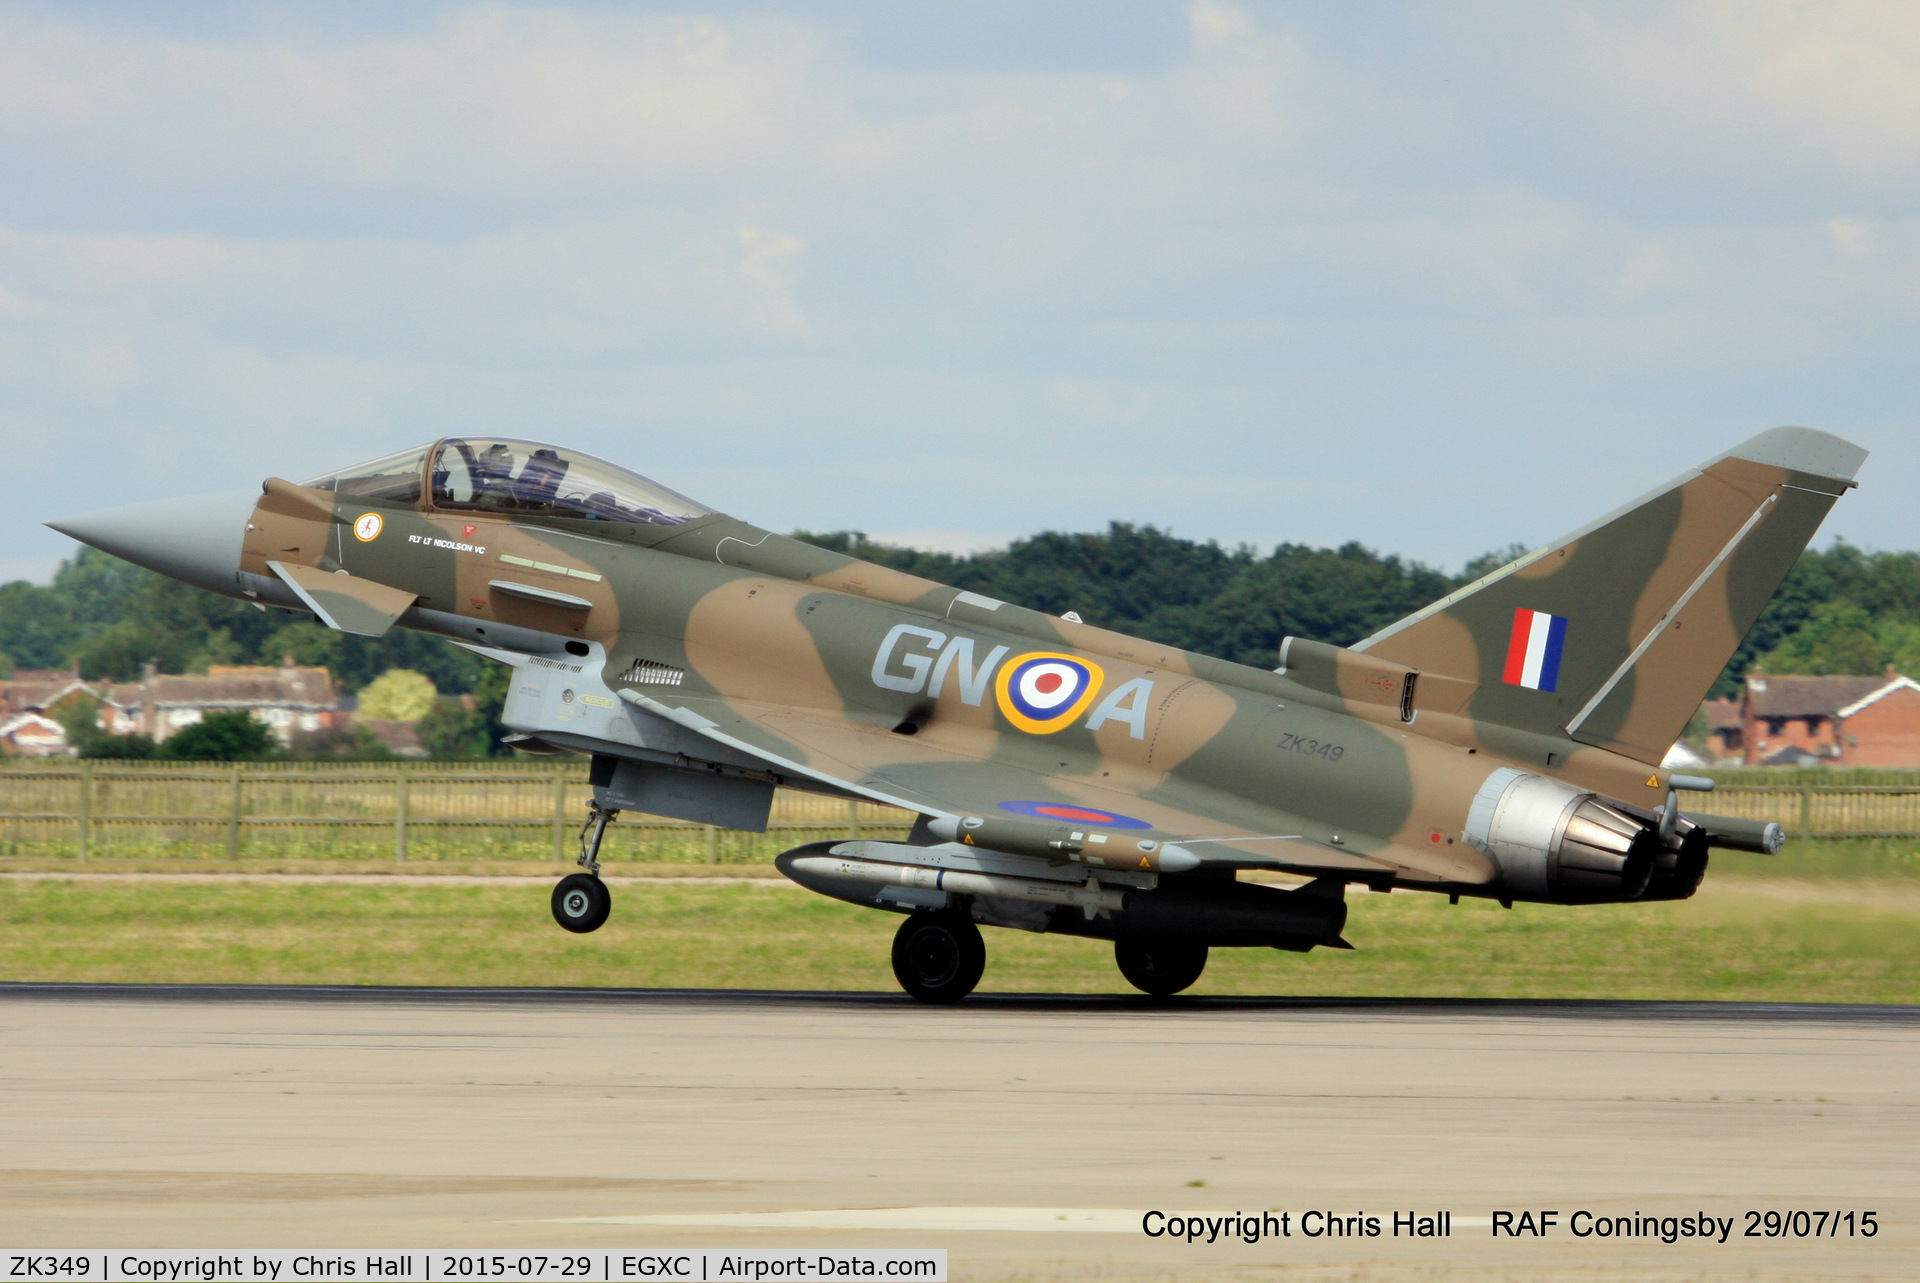 ZK349, Eurofighter EF-2000 Typhoon FGR.4 C/N BS110/399, Battle of Britain 75th Anniversary “Hawker Hurricane” Livery